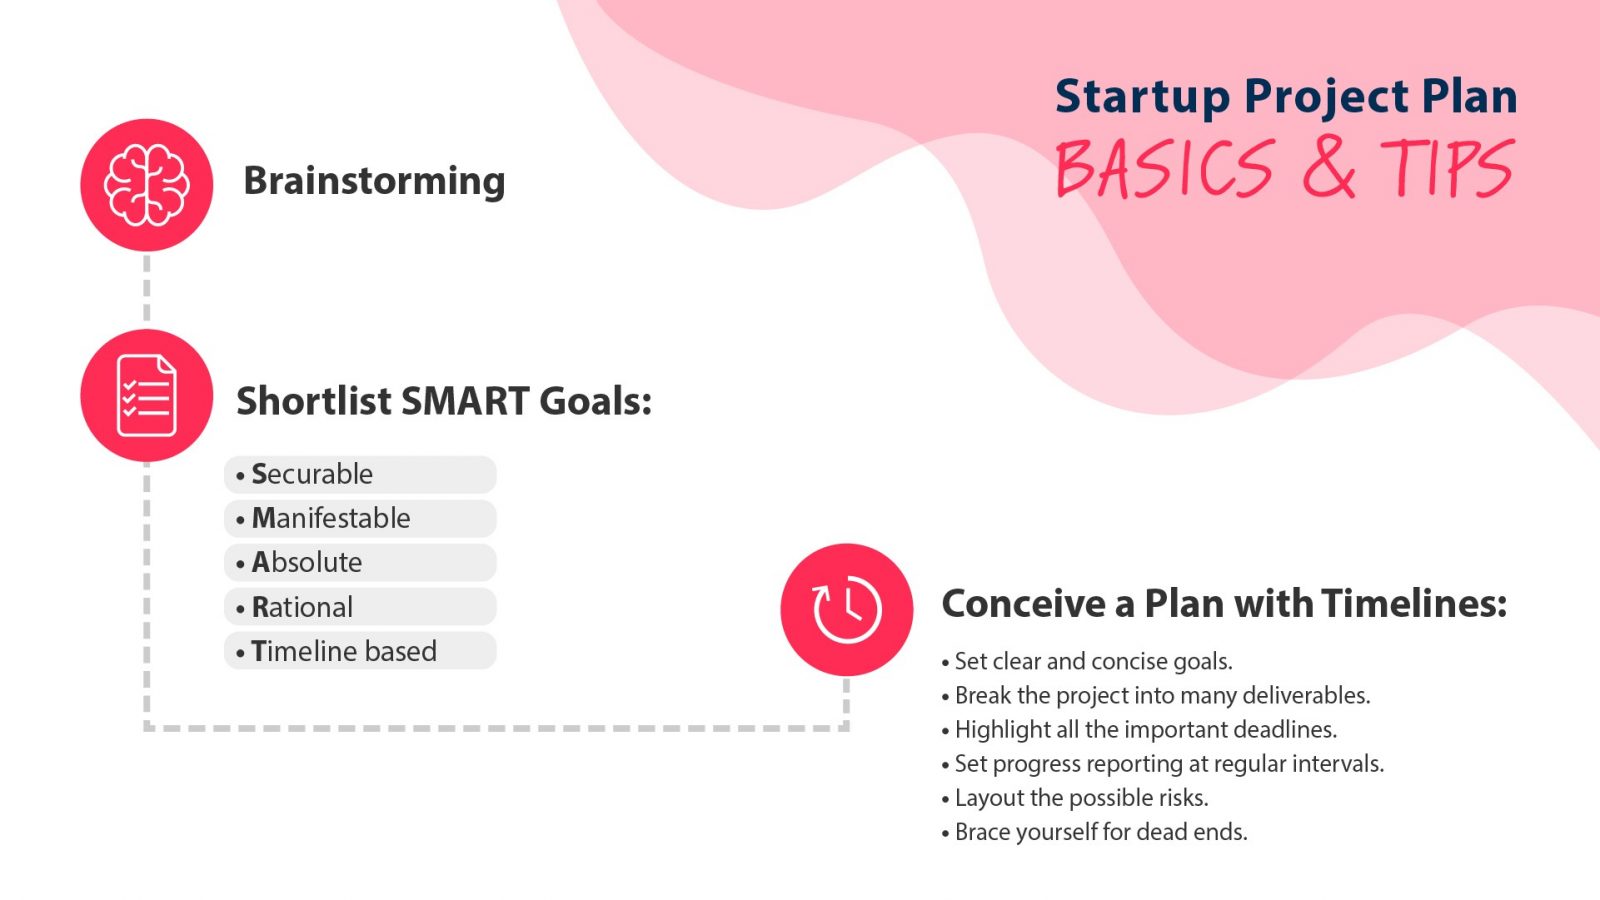 Startup project plan basics and tips